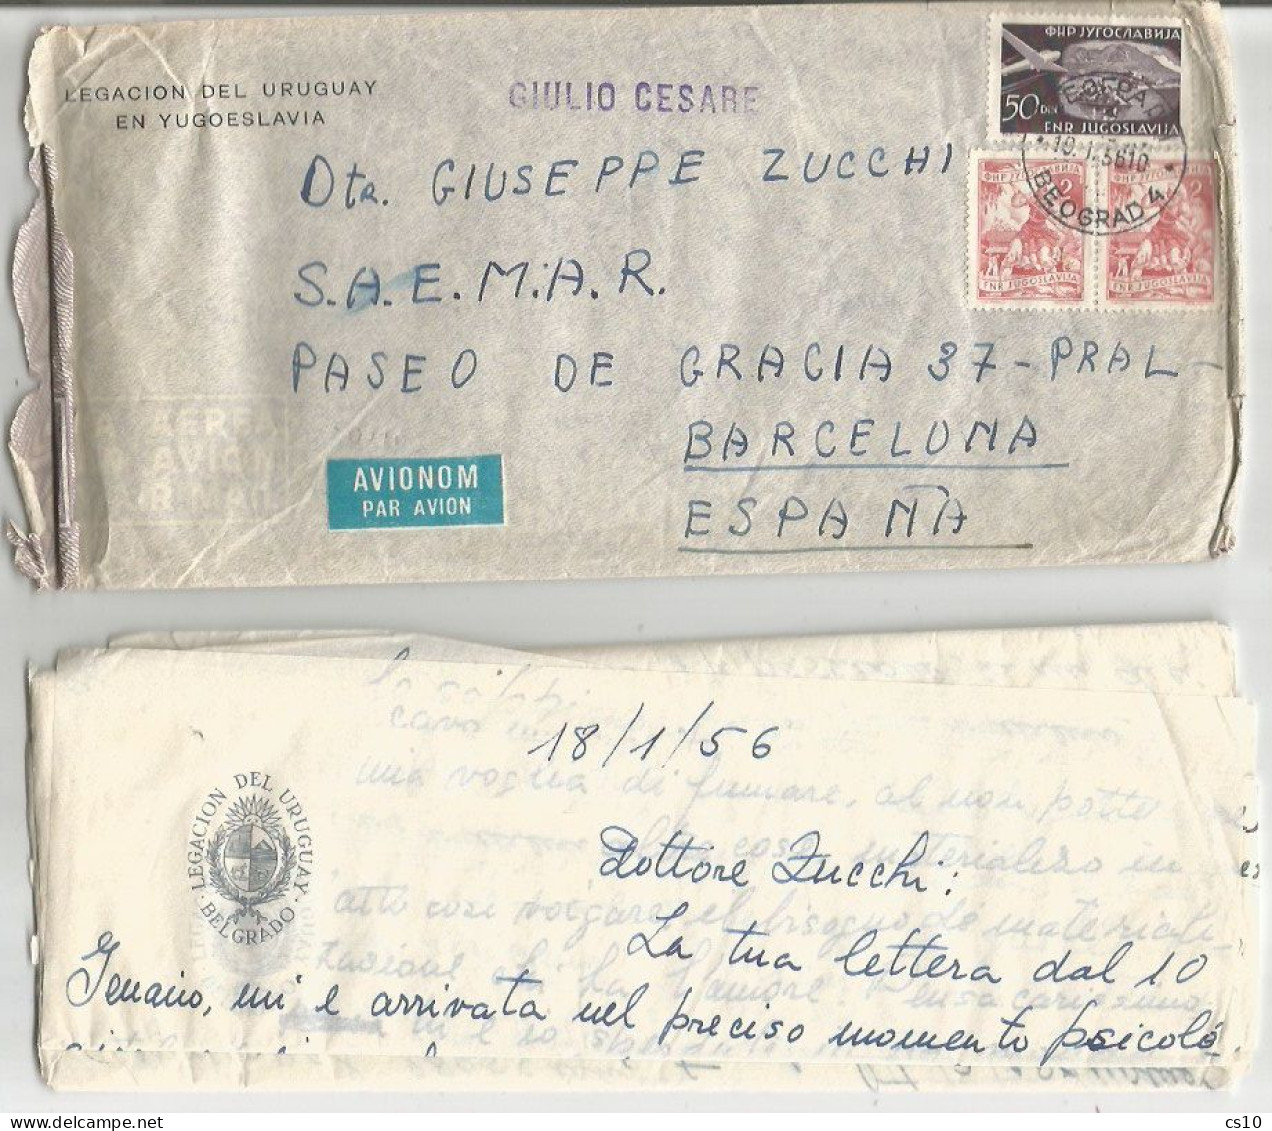 Jugoslavija Legation Uruguay AirmailCV Beograd 19jan1956 X Spain To S/S "Giulio Cesare" With Content (6pages) - Luftpost